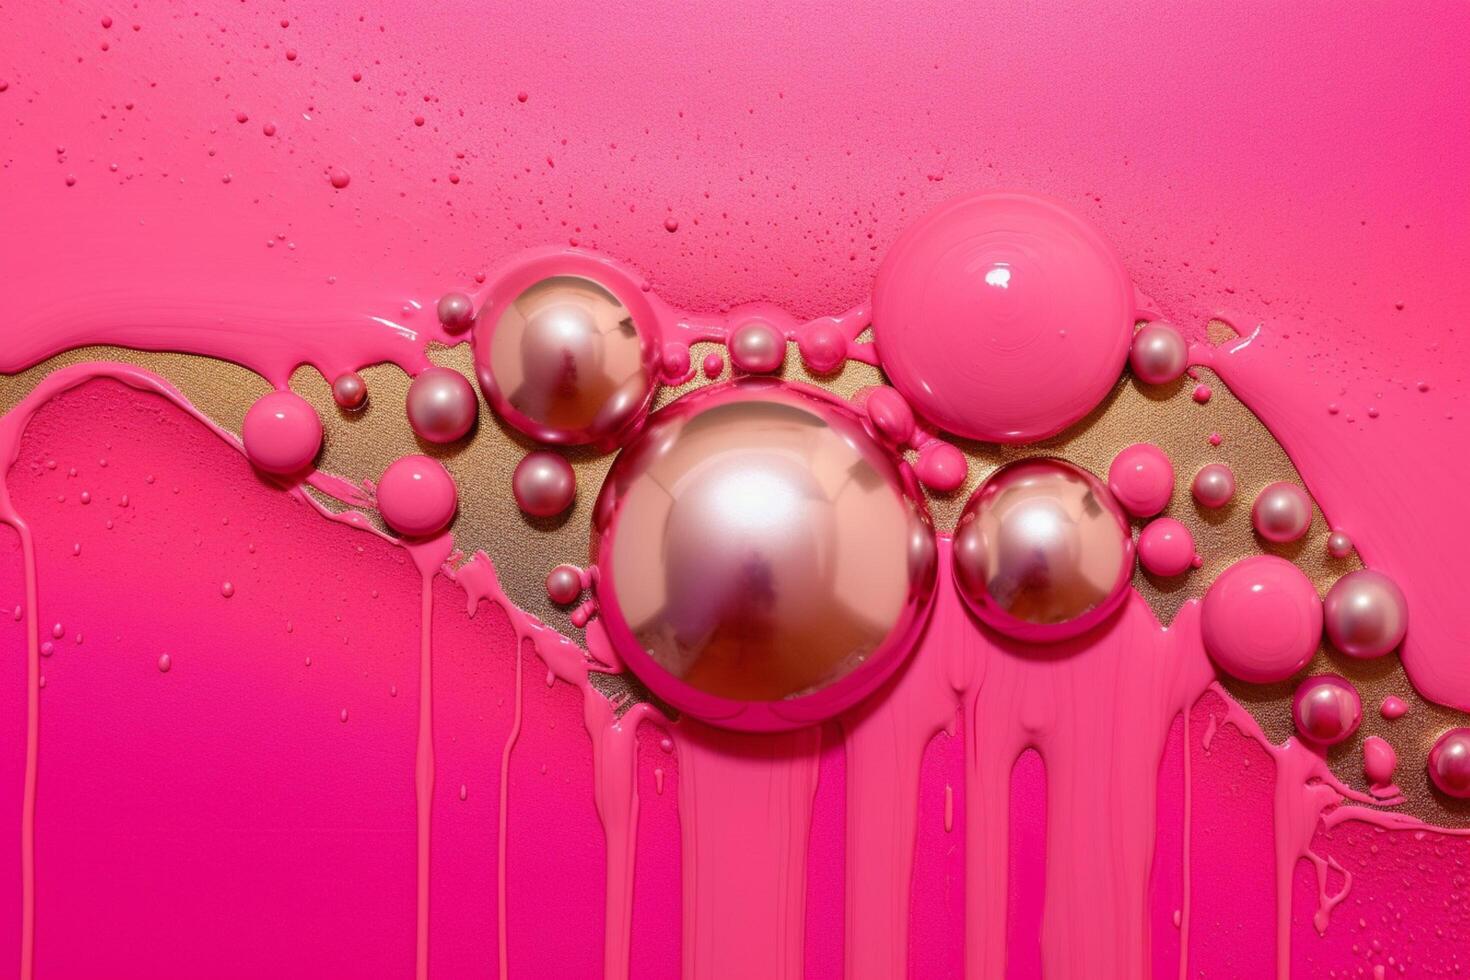 A vivid pink background with metallic accents photo